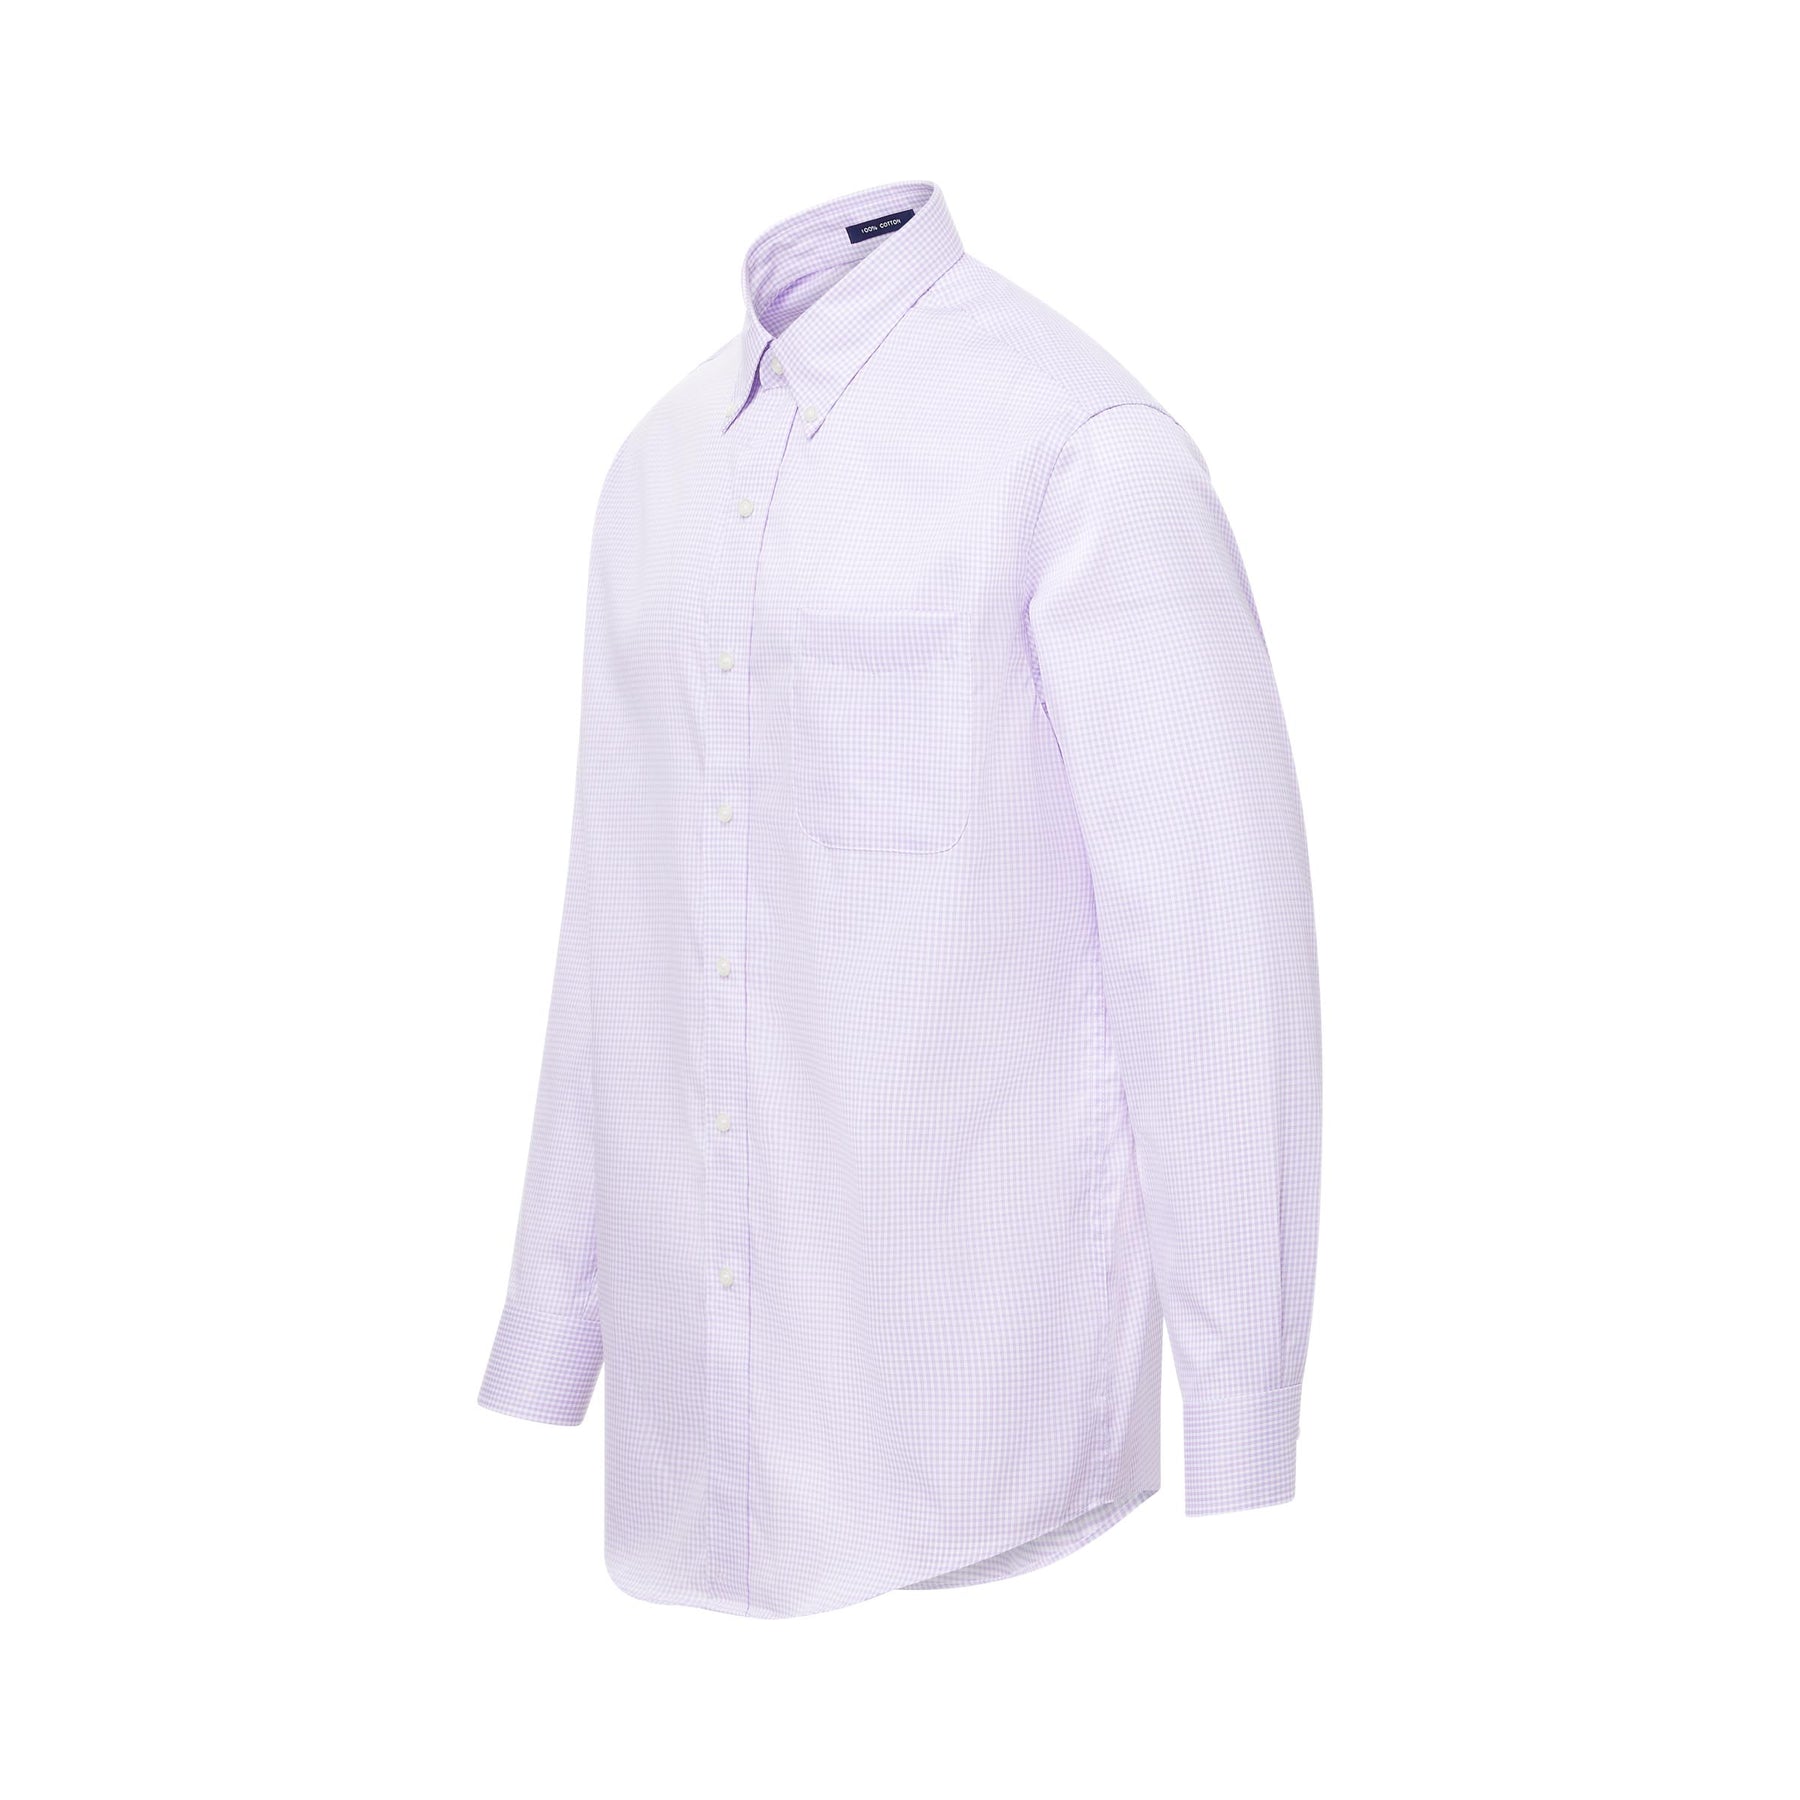 Long Sleeve Lilac and White Micro Plaid Button Down Shirt With Magnetic Buttons